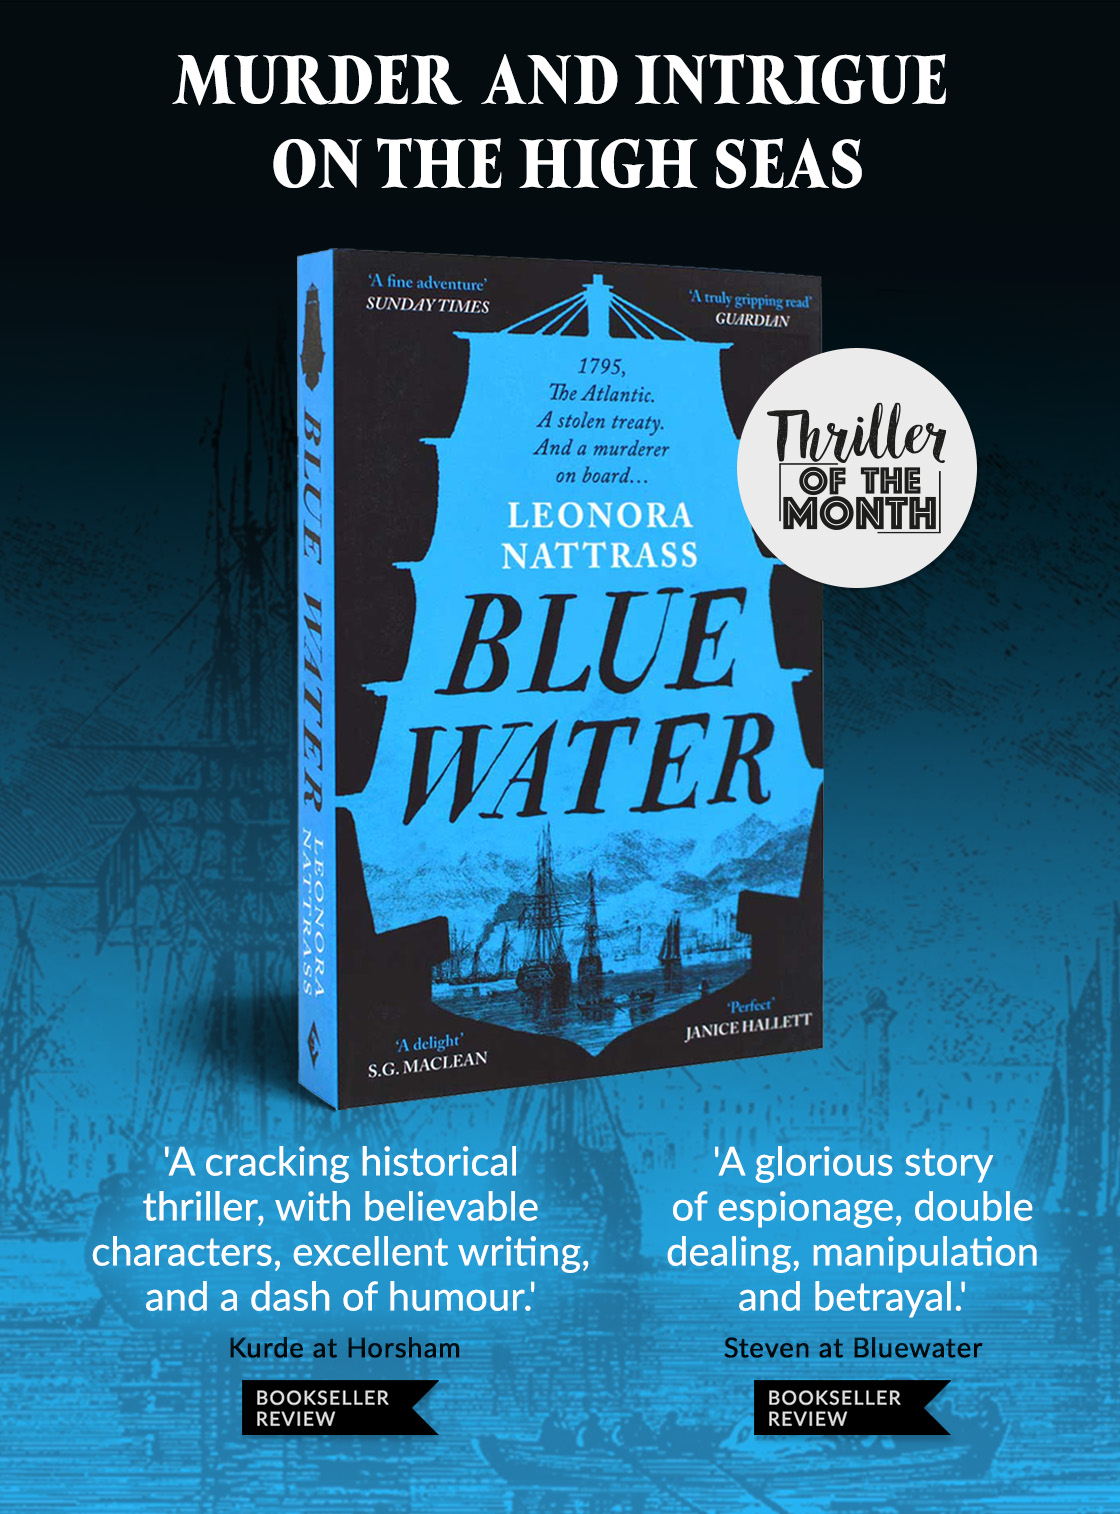 Blue Water by Leonora Nattrass | THRILLER OF THE MONTH | Murder and intrigue on the high seas | ‘A glorious story of espionage, double dealing, manipulation and betrayal.’ Steven at Bluewater | 'A cracking historical thriller, with believable characters, excellent writing, and a dash of humour.' Kurde at Horsham MURDER AND INTRIGUE ON THE HIGH SEAS SUNDAY TIMES 4 R S.G. .l:Cl,I,:N 'A cracking historical thriller, with believable characters, excellent writing, and a dash of humour! BOOKSELLER GUARDIAN O LEONORA H NATTRASS e ETT A glorious story of espionage, double dealing, manipulation and betrayal. BOOKSELLER 